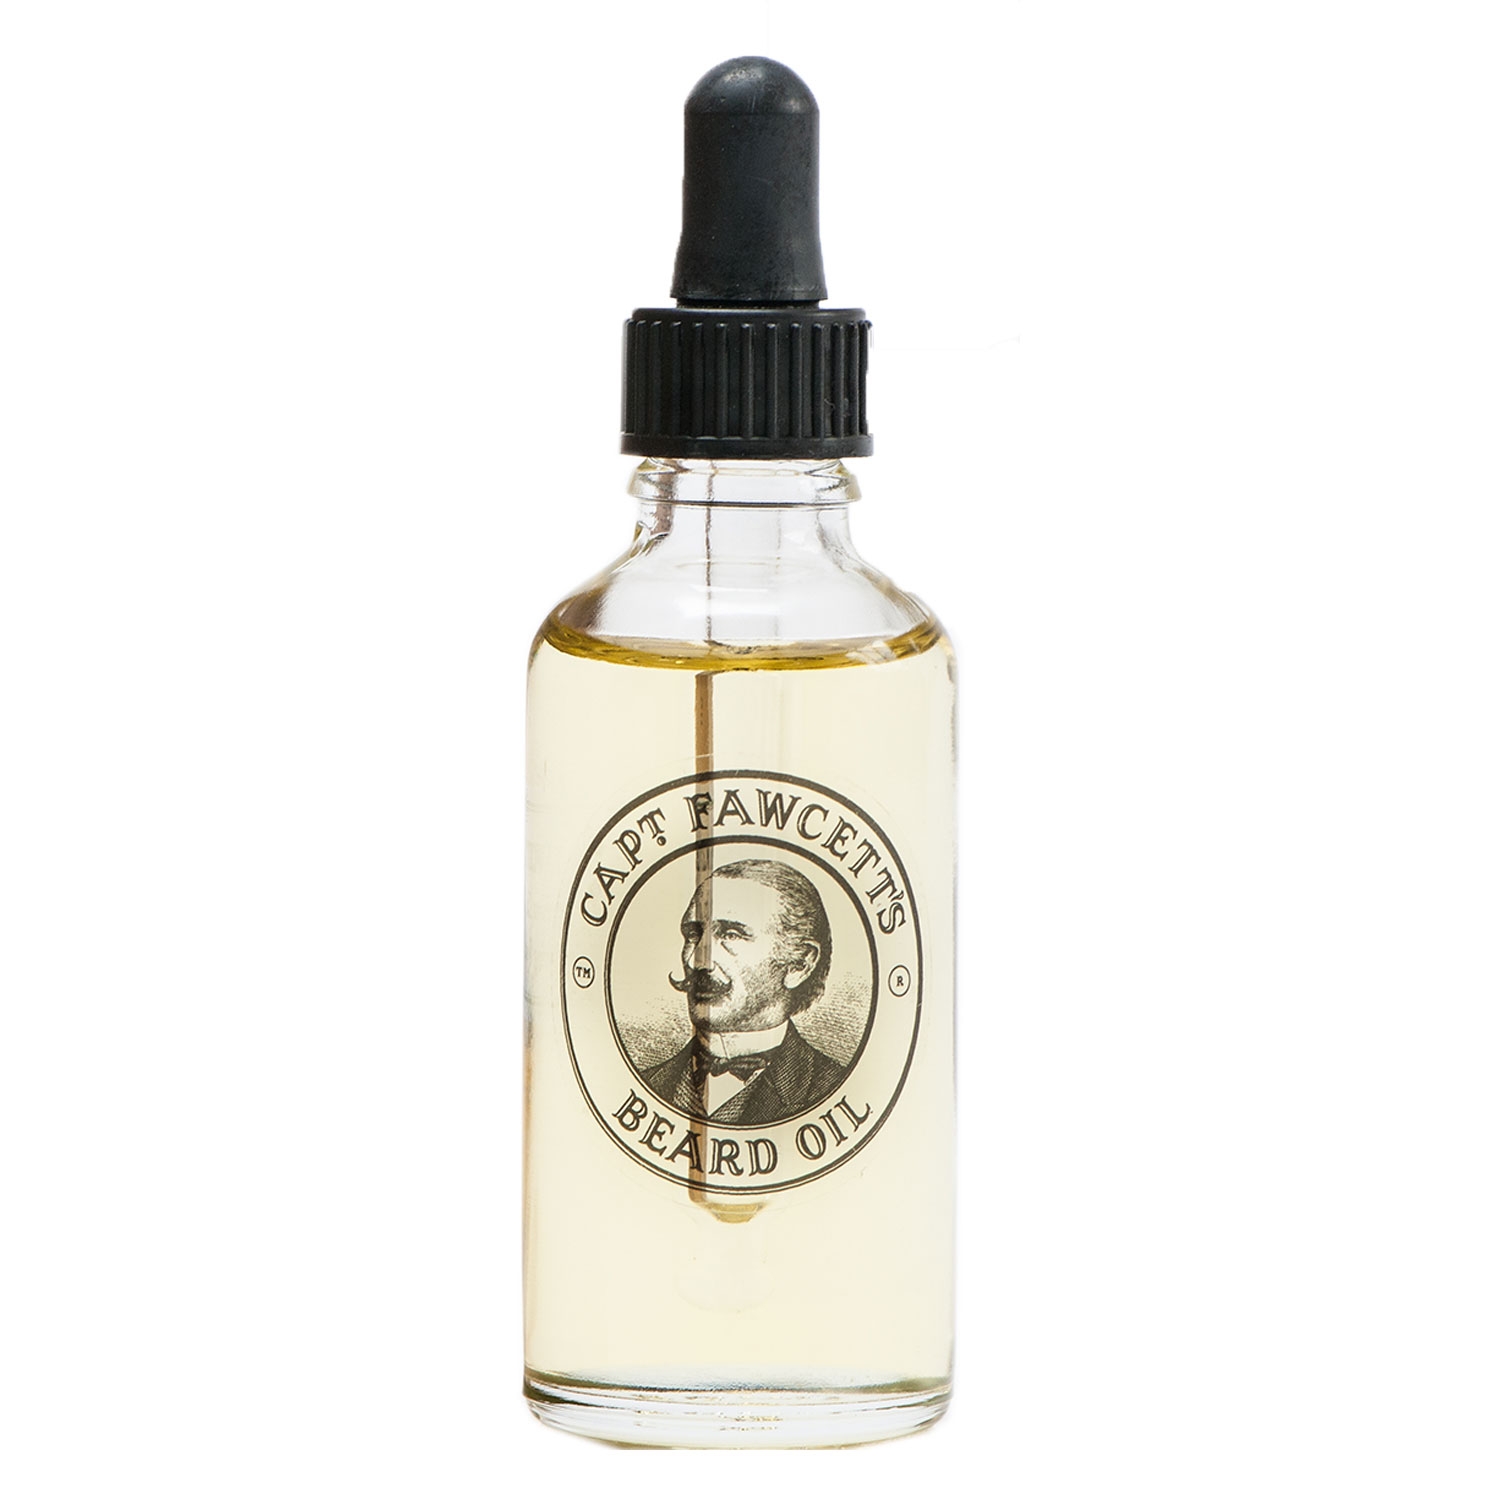 Product image from Capt. Fawcett Care - Private Stock Beard Oil